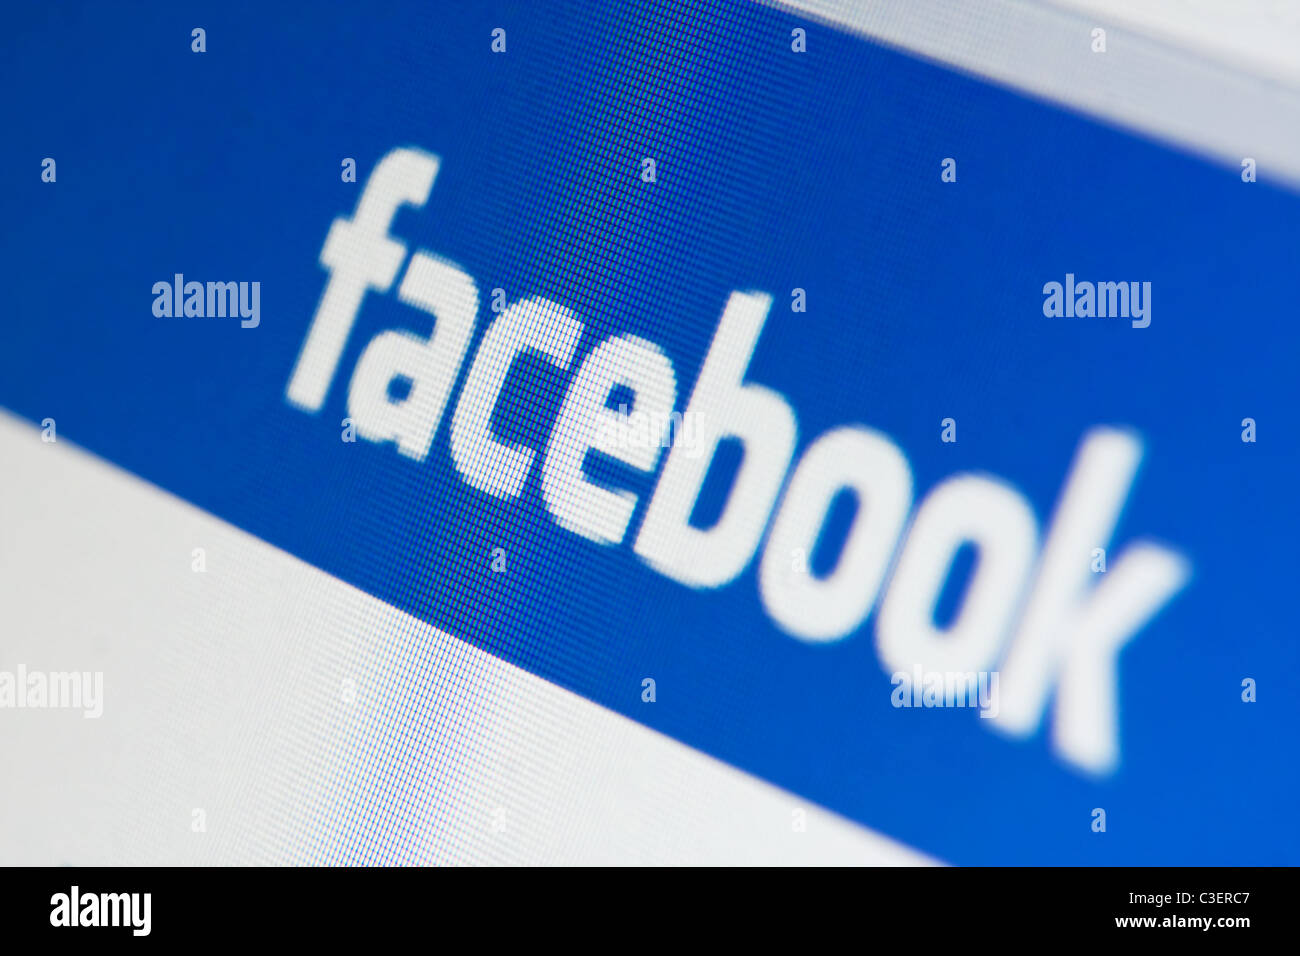 Muenster, Germany - May 7, 2011: facebook.com website on computer screen. Facebook is the biggest social networking website. Stock Photo